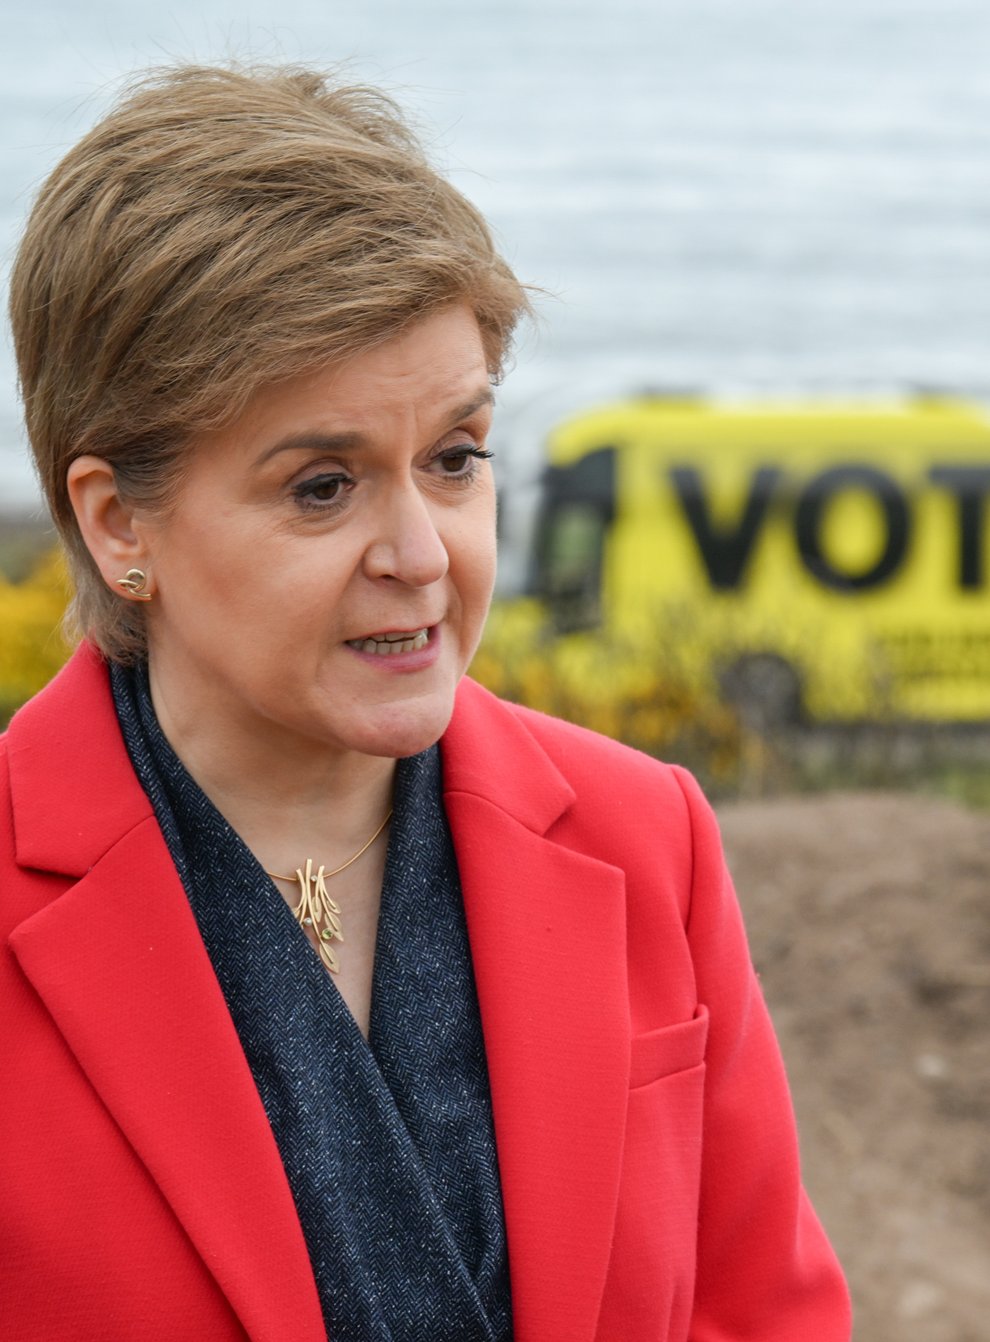 Nicola Sturgeon said her Government was considering ‘carefully’ whether legal advice regarding a second independence referendum could be published (Michael Wachucik/PA)